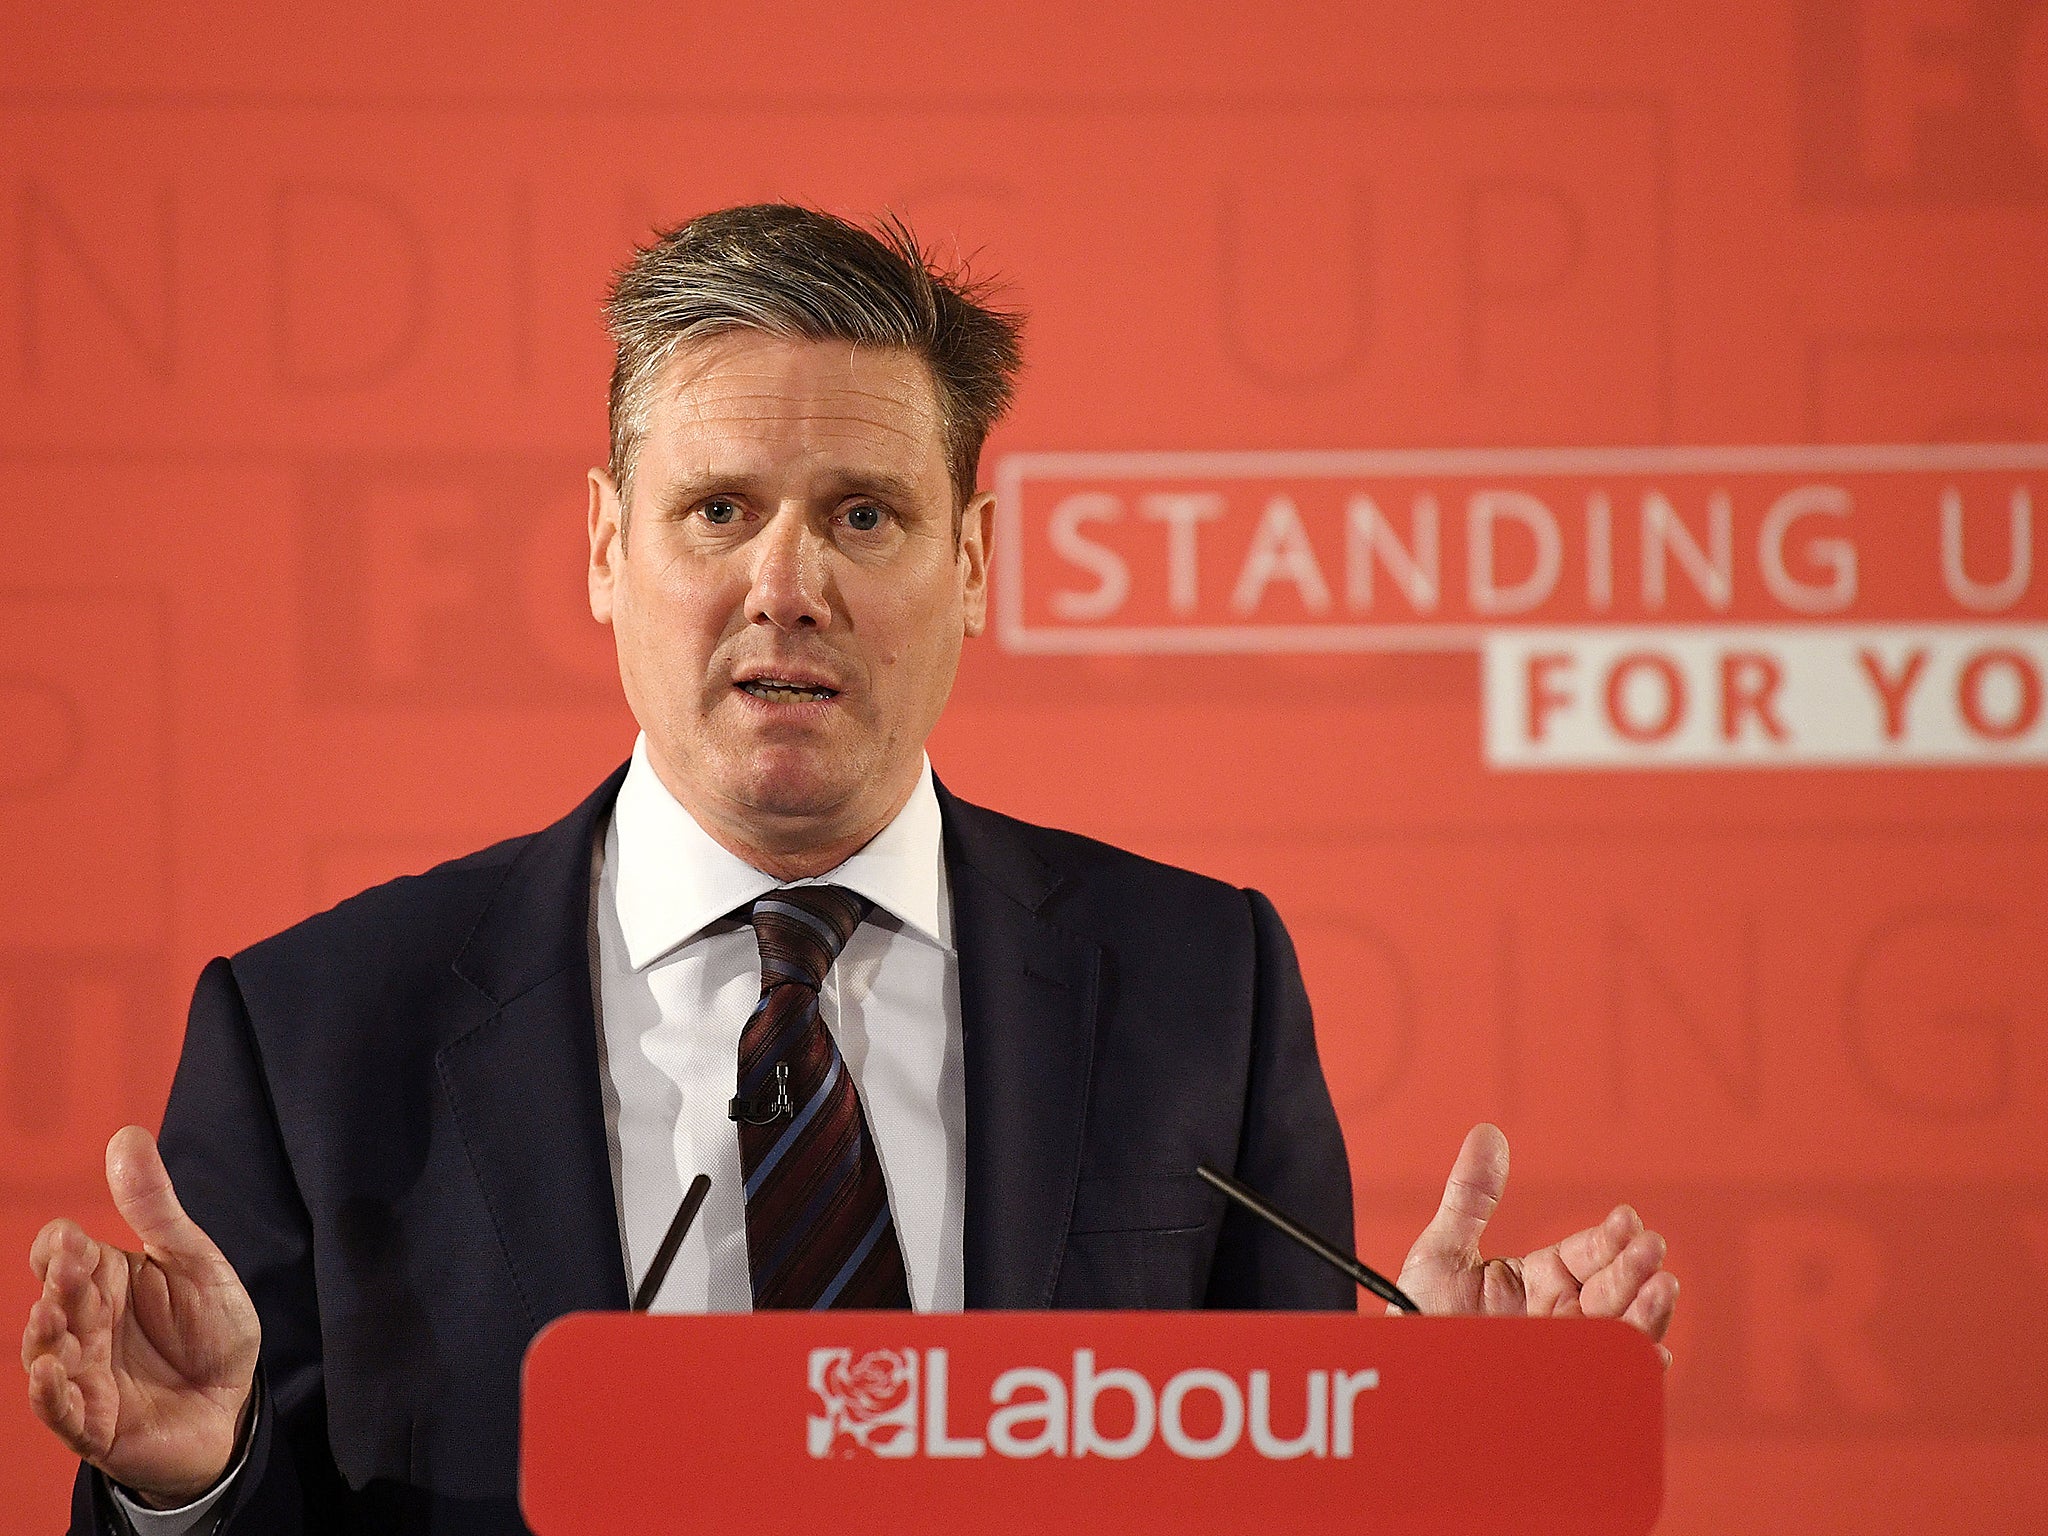 Sir Keir Starmer has also criticised the rationale for leaving the customs union